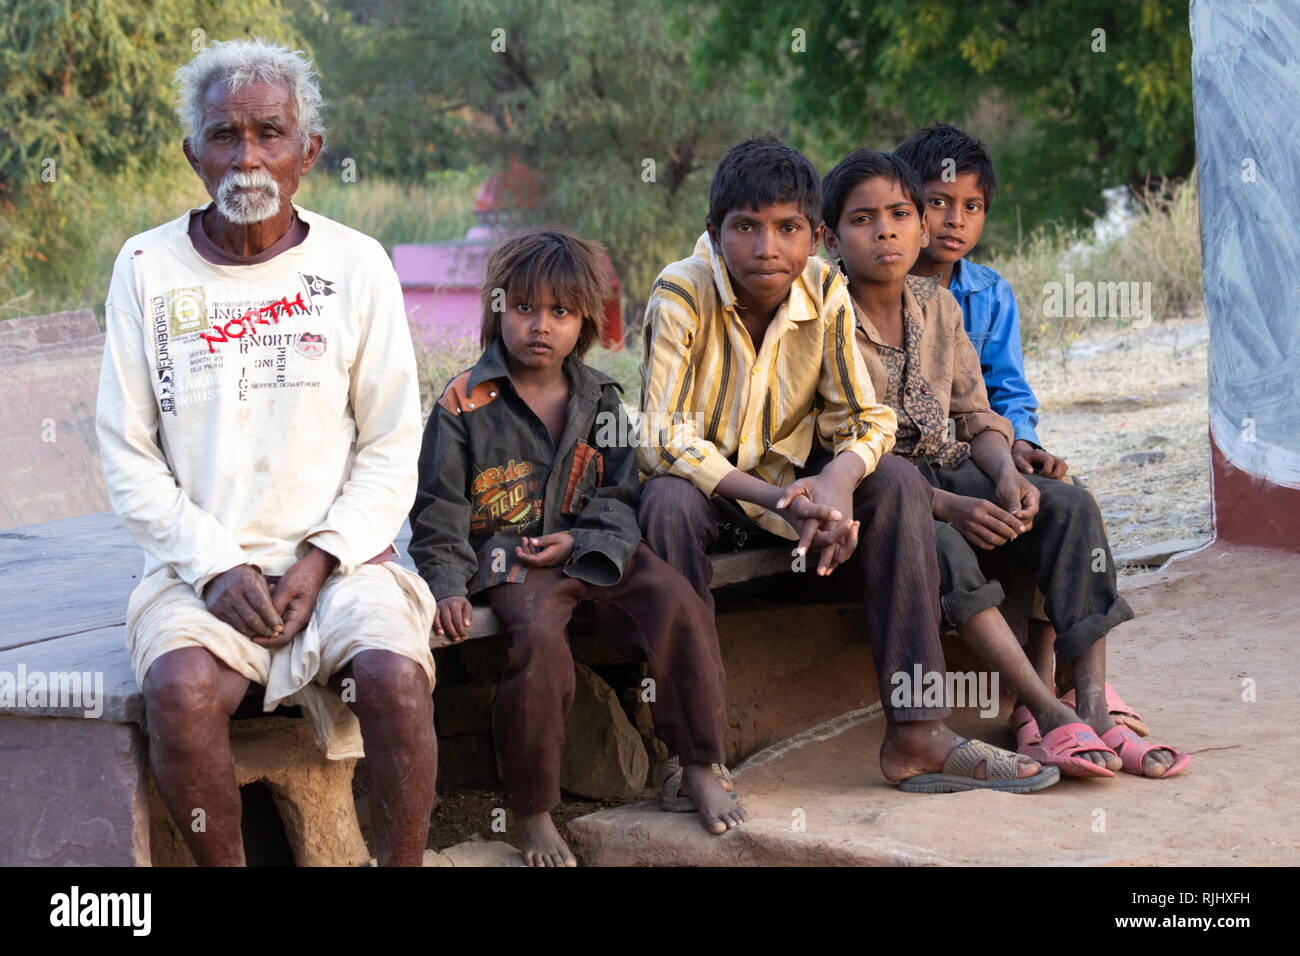 Bhil tribespeople. An elderly man sits with four young boys in their village near Bhainsrorgargh, Rajasthan, India. Stock Photo